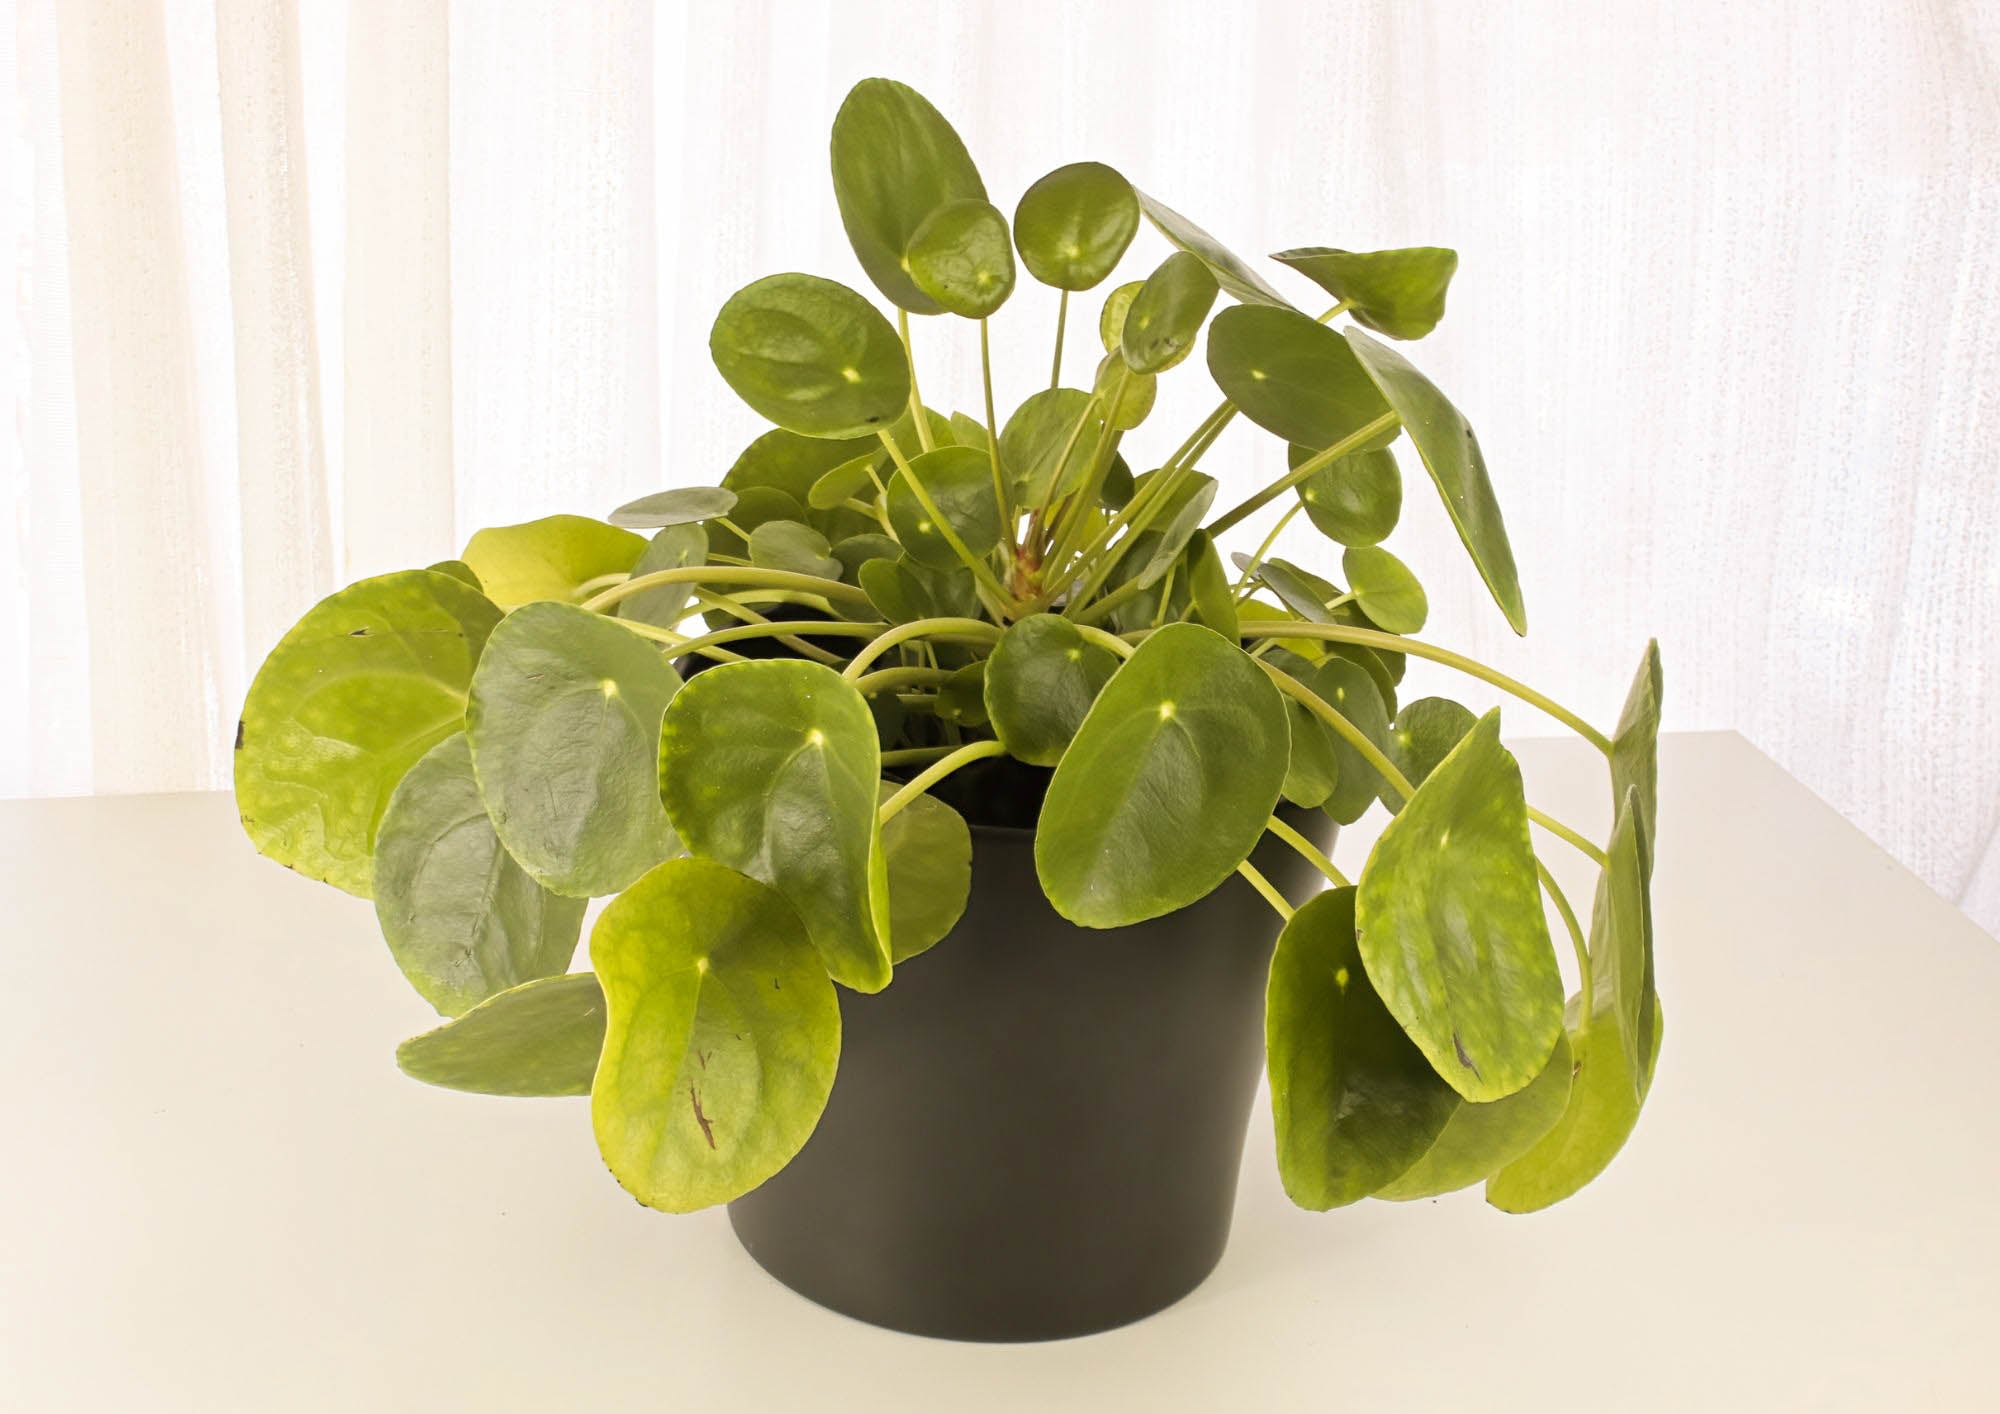 Chinese money plant drooping leaves